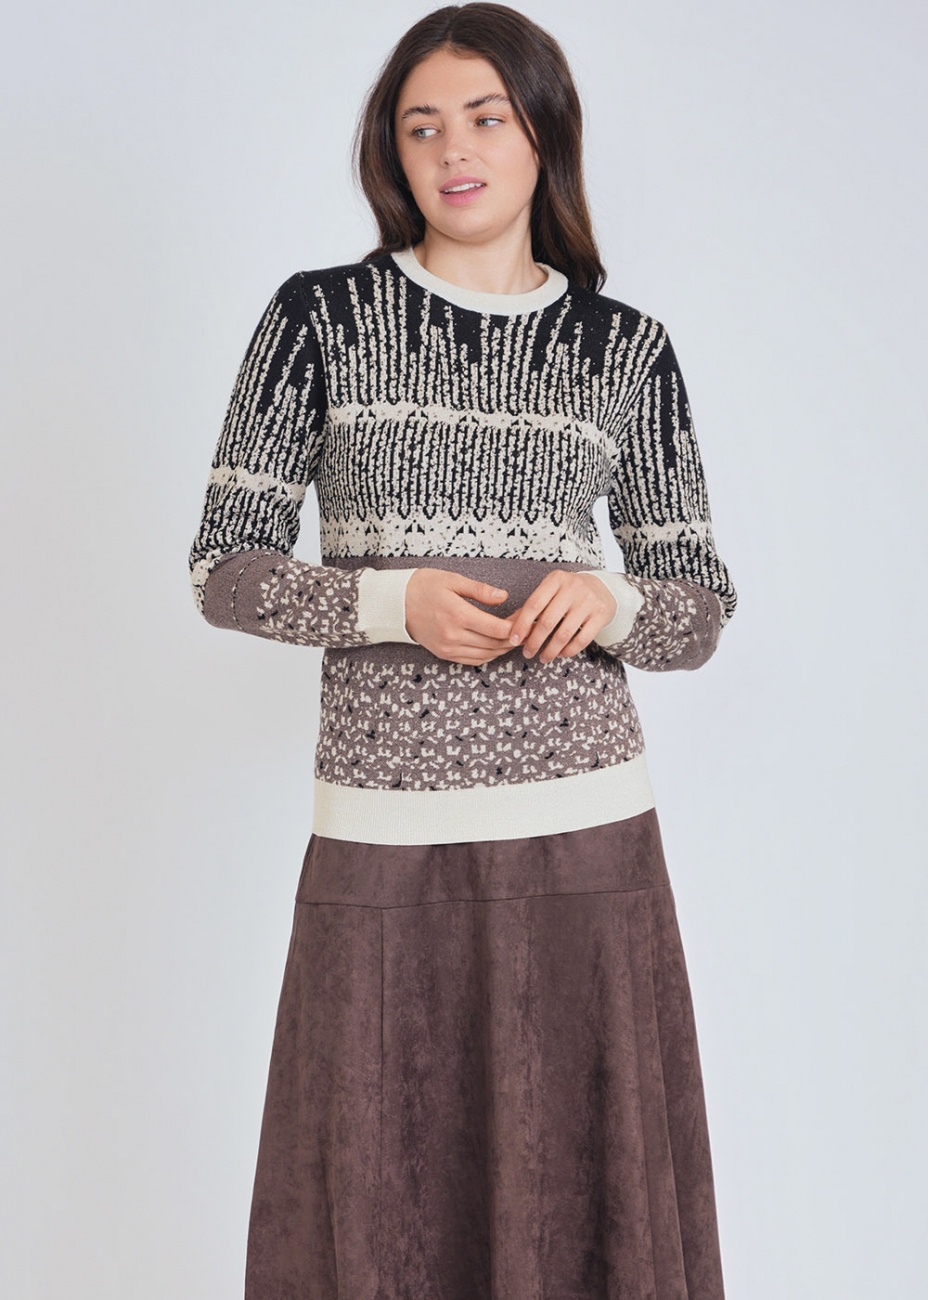 Multihued Knit Sweater with Artistic Touch